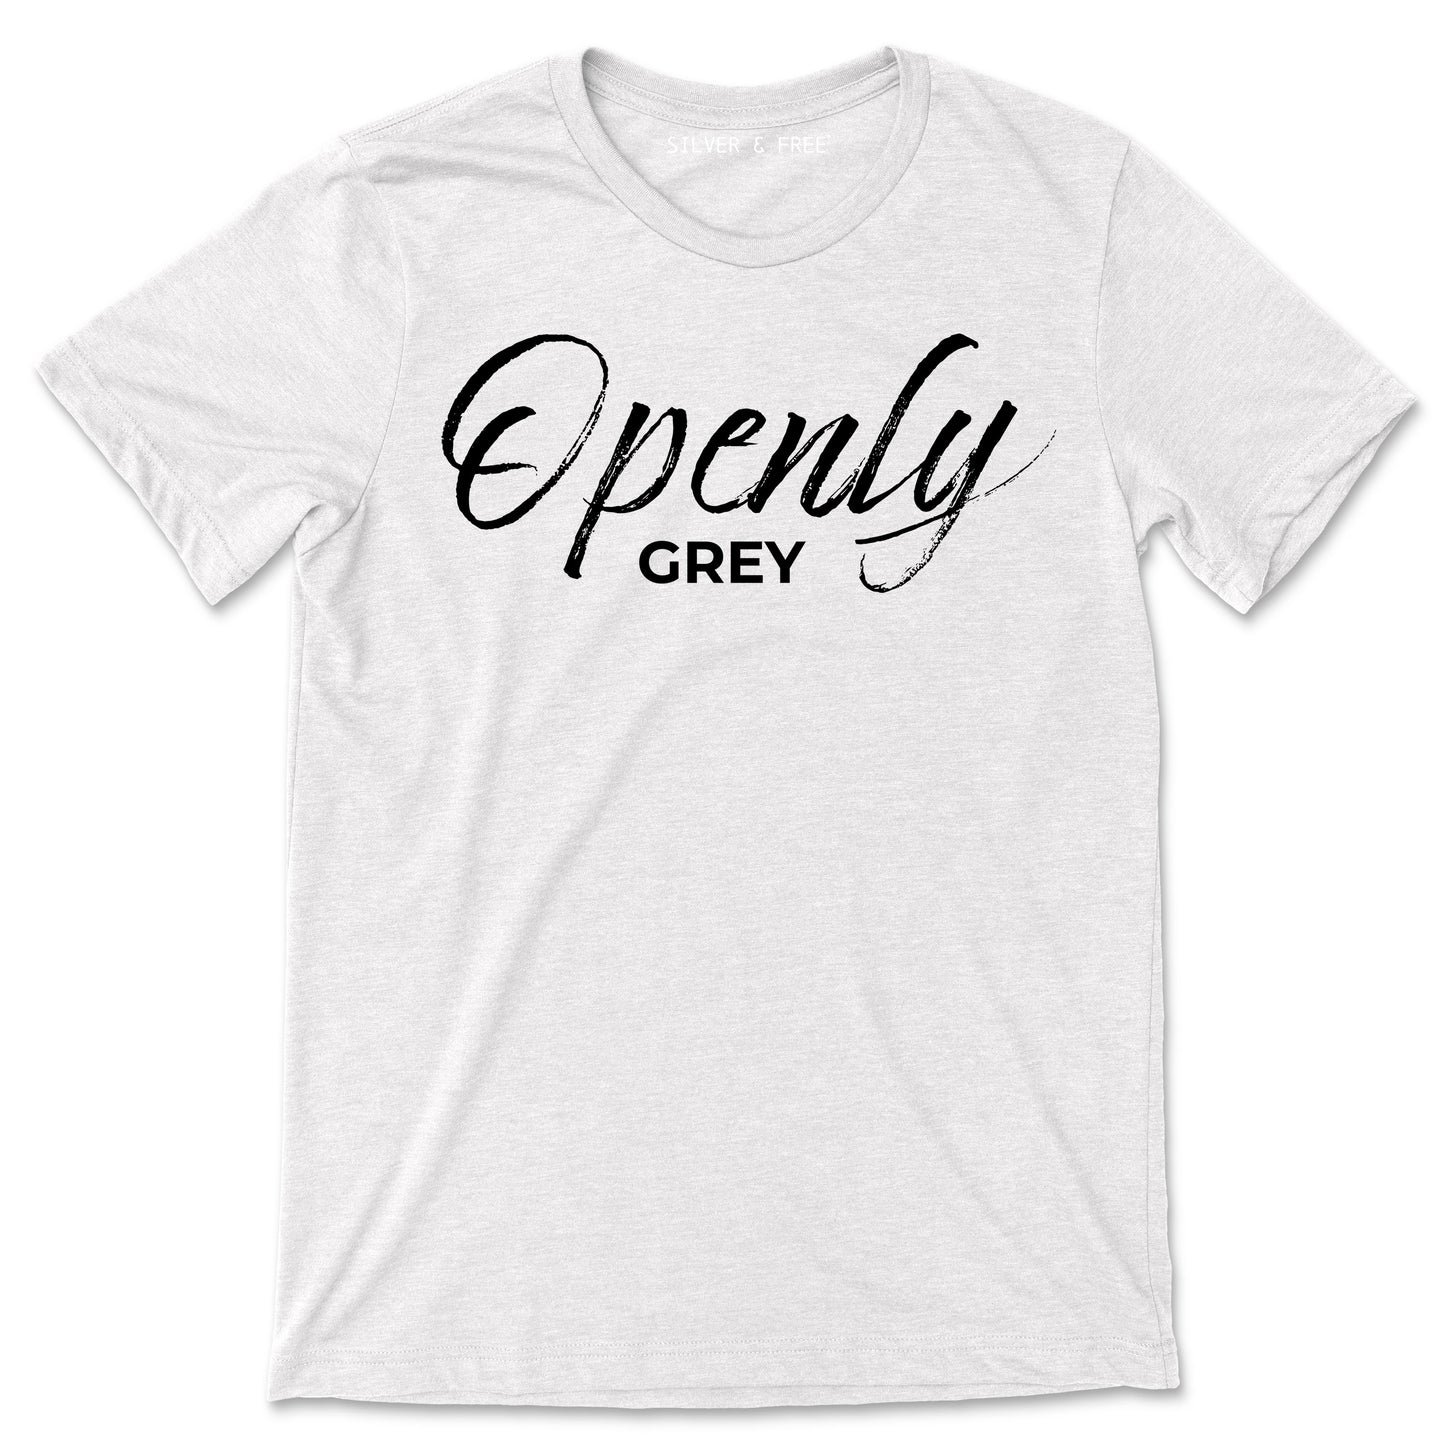 Openly Gray Super Soft Tee - NEW